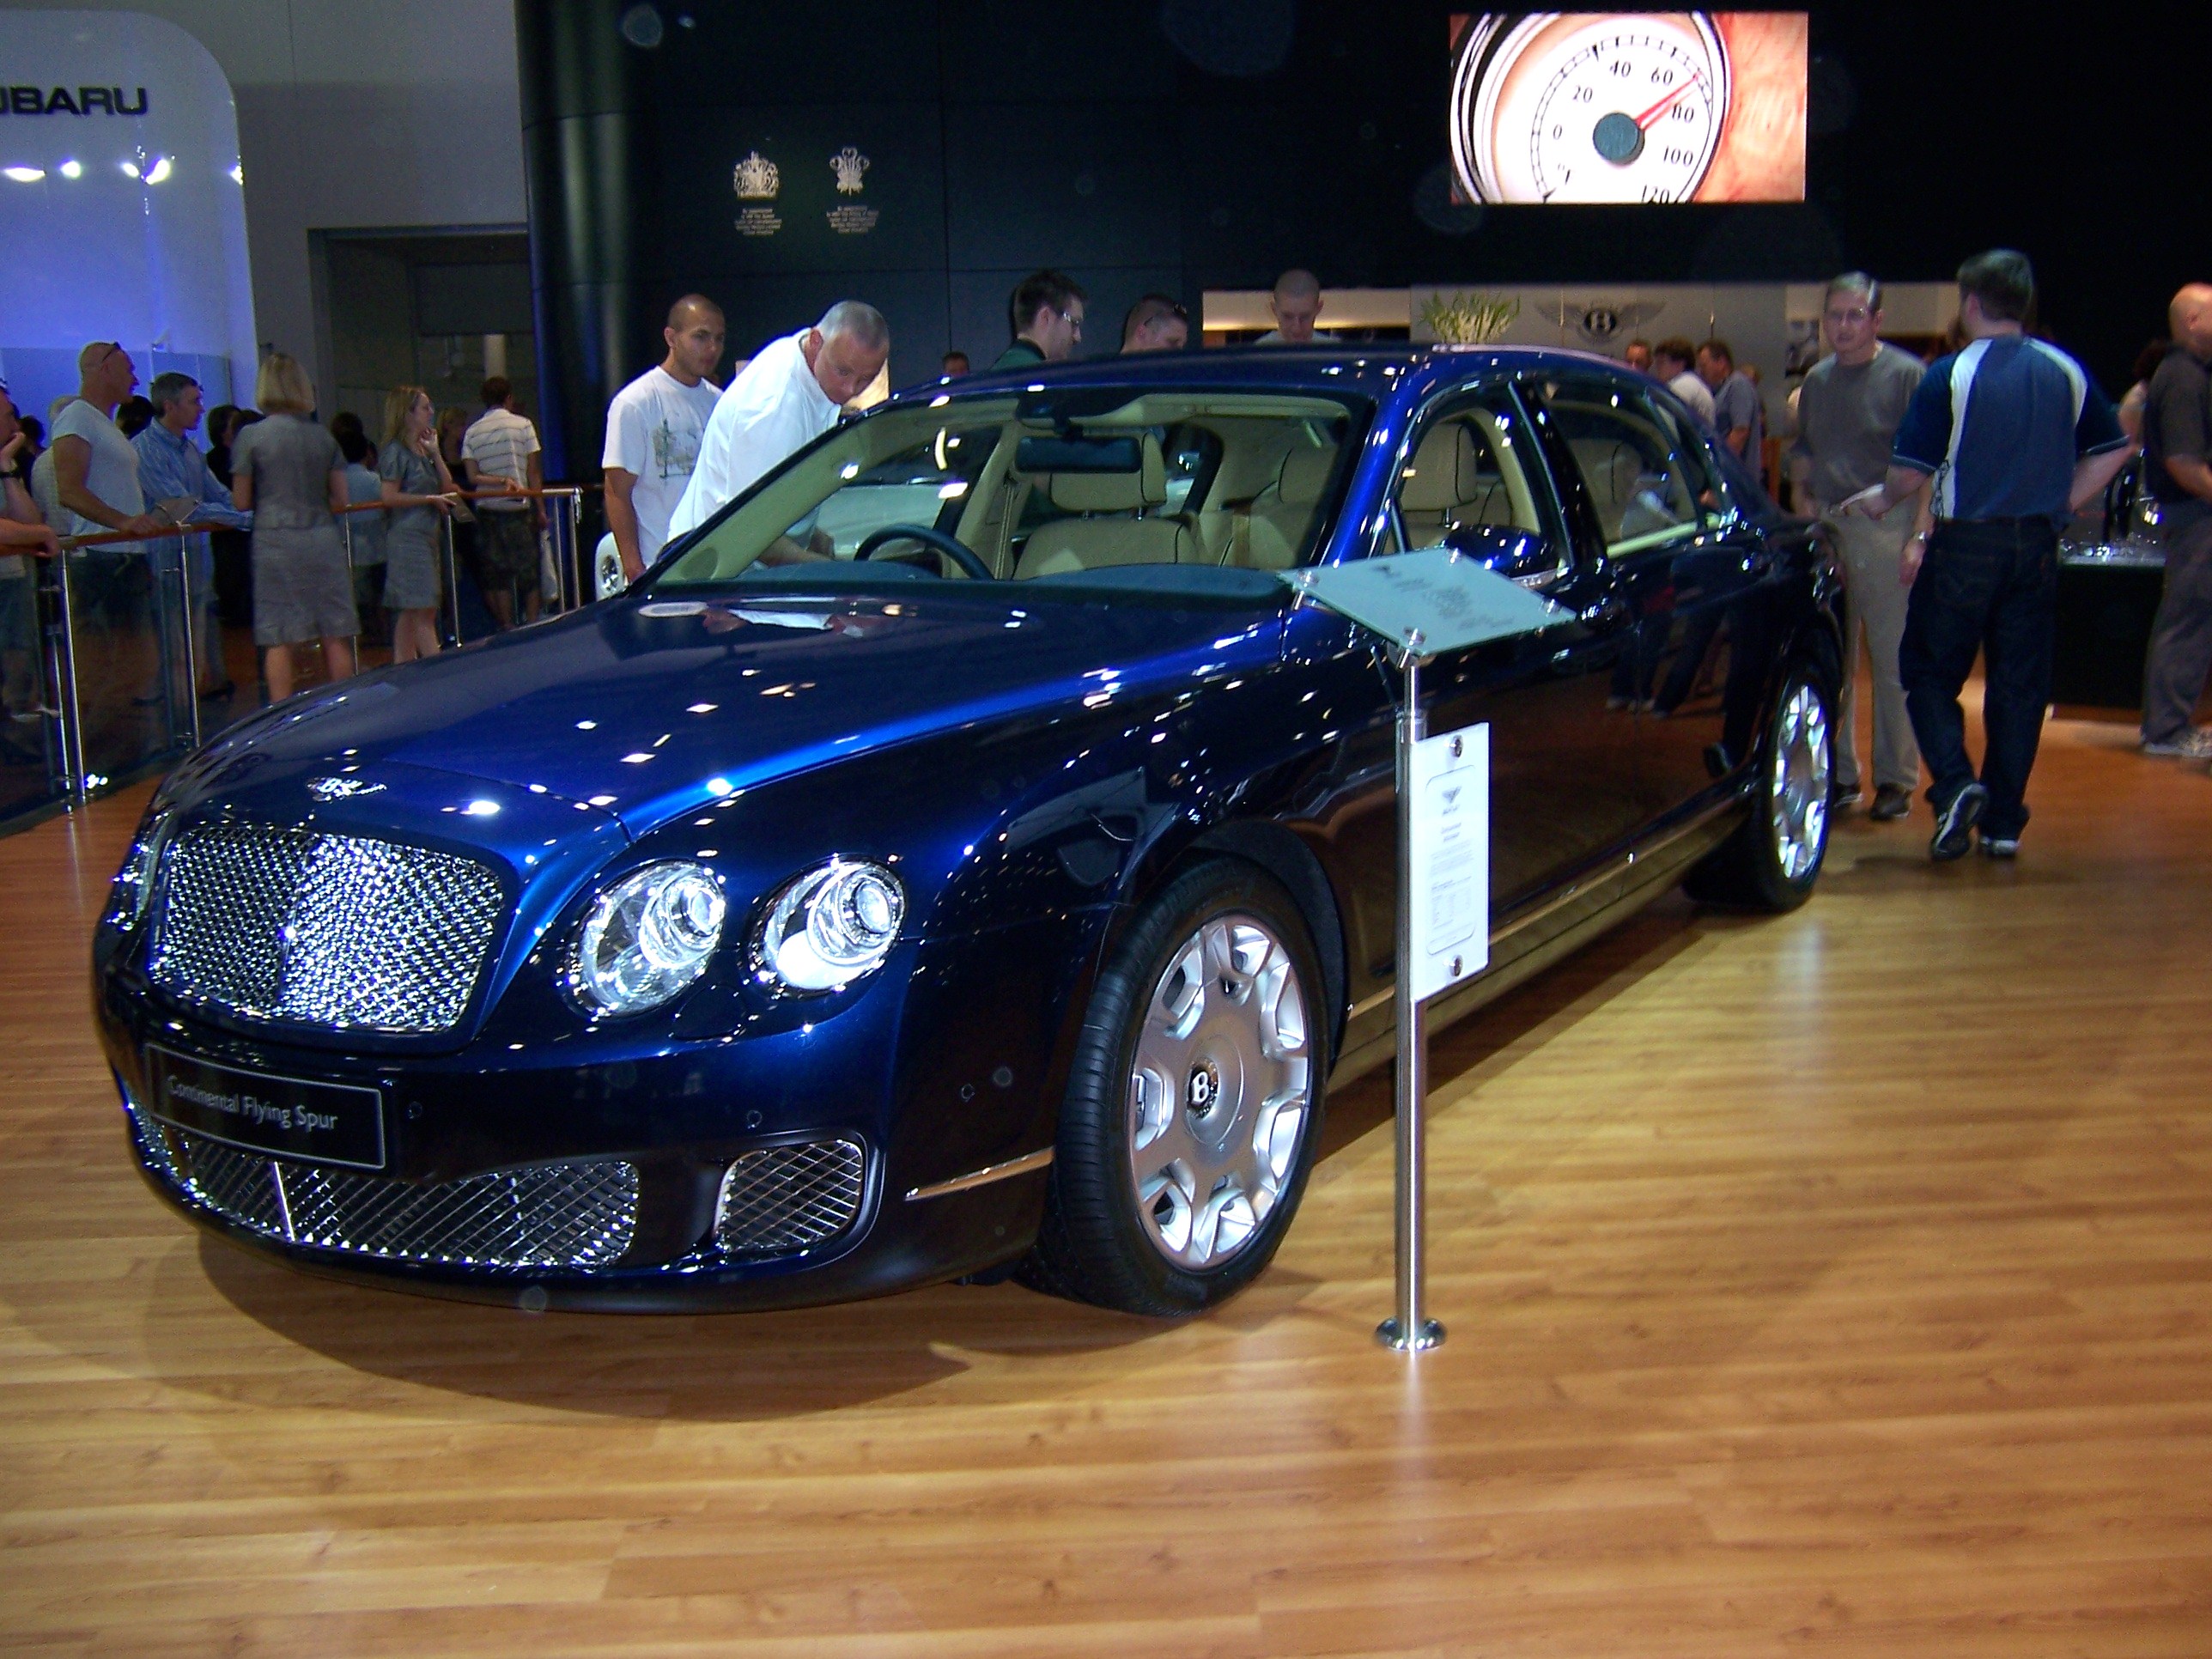 File:Bentley Continental Flying Spur Facelift.jpg - Wikimedia Commons